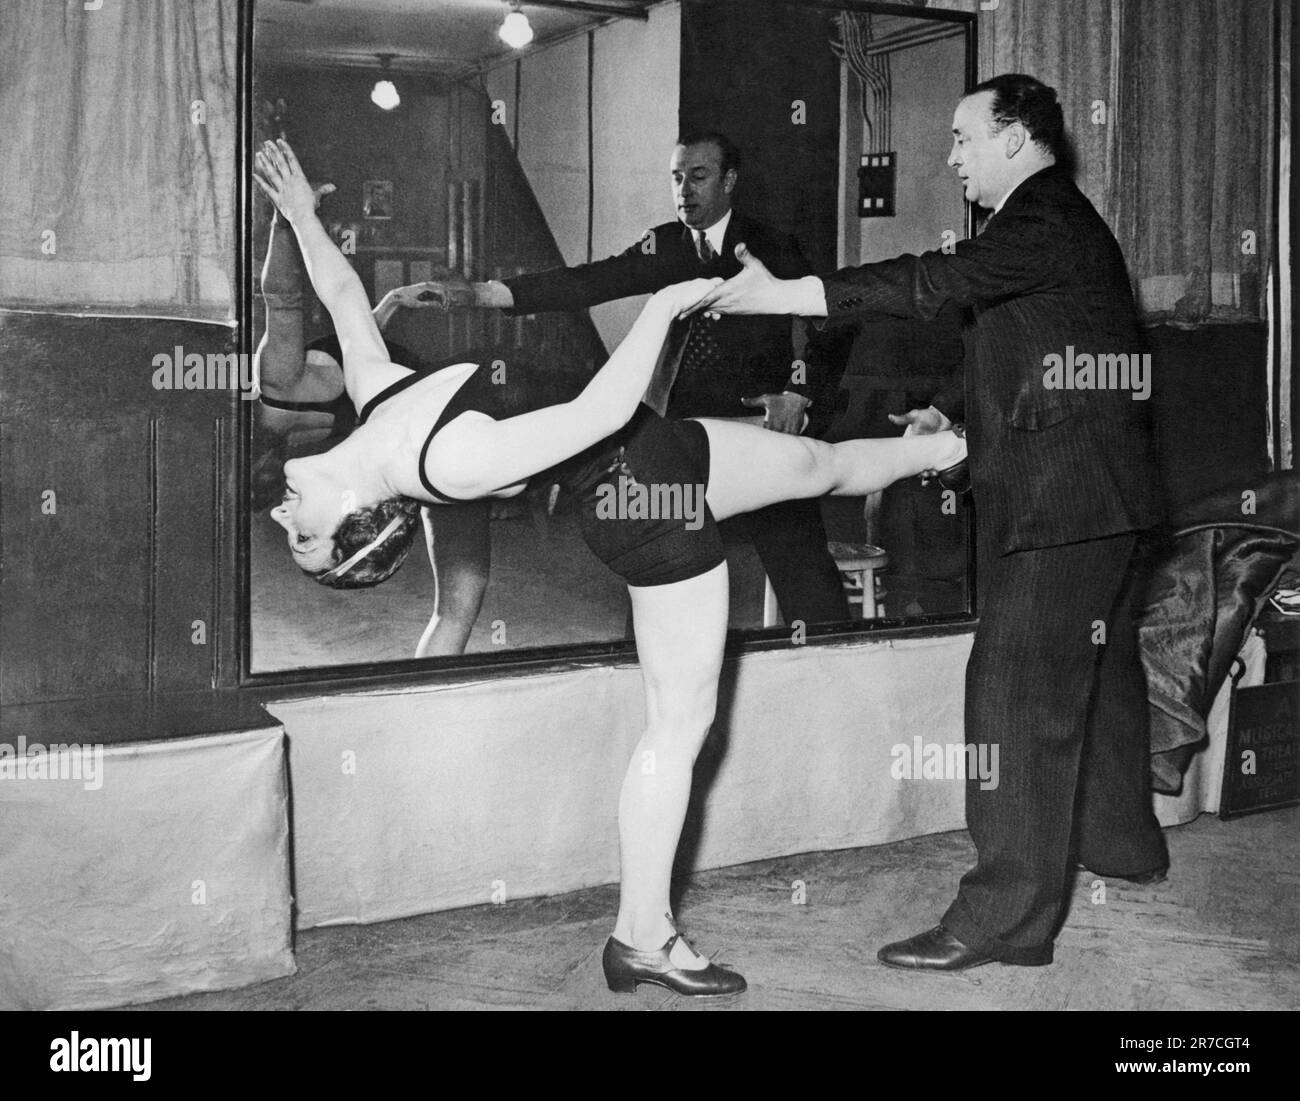 London, England:  c. 1934. Princess Irene Bogdan of Romania training at the London Dance School to make her dancing debut for a forthcoming production. Stock Photo